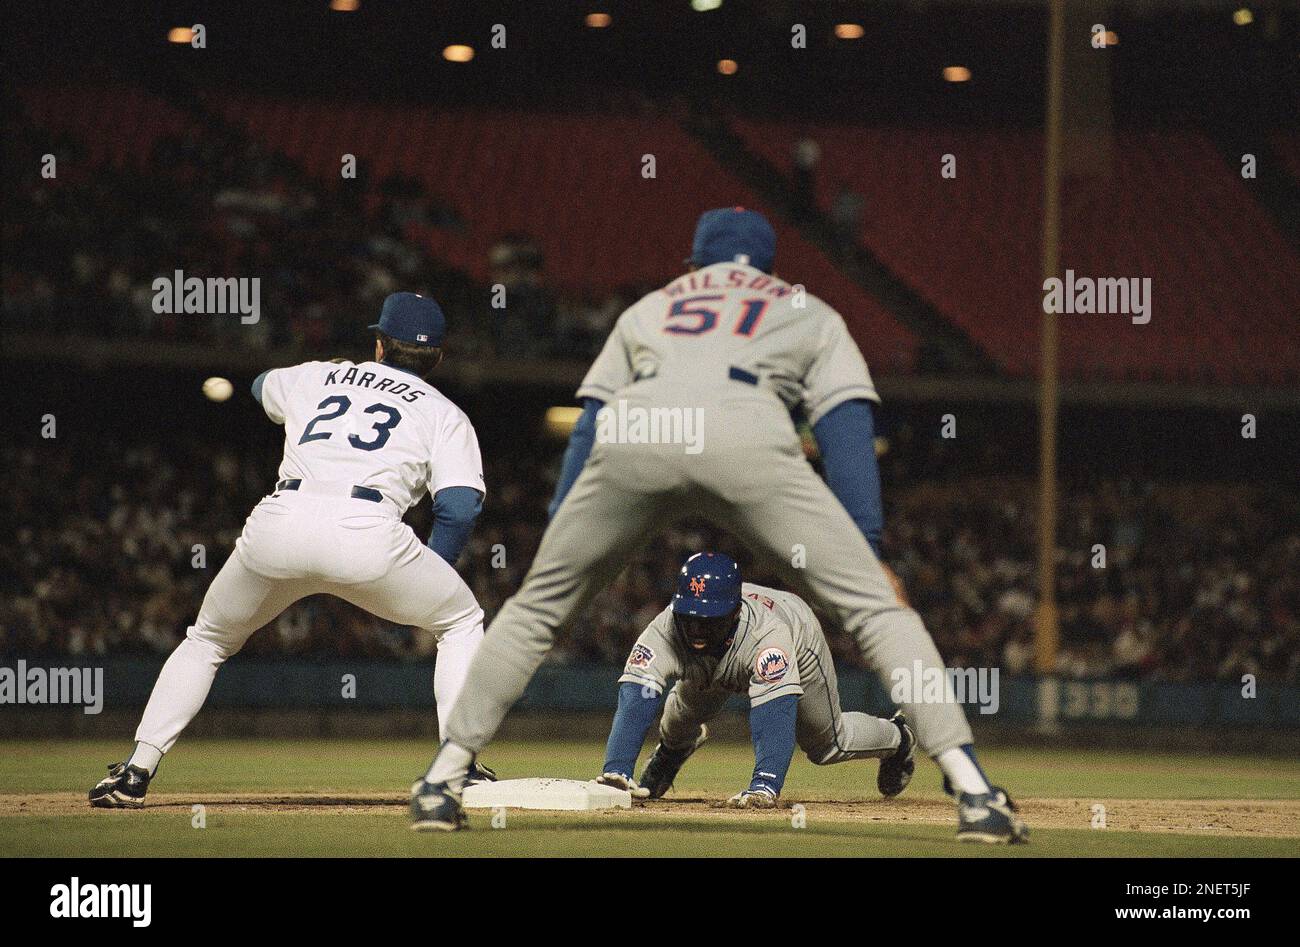 Carl Everett of the New York Mets, center, dives back to first base while Eric  Karros of the Los Angeles Dodgers, left, takes the throw from the pitcher  as Mets first base